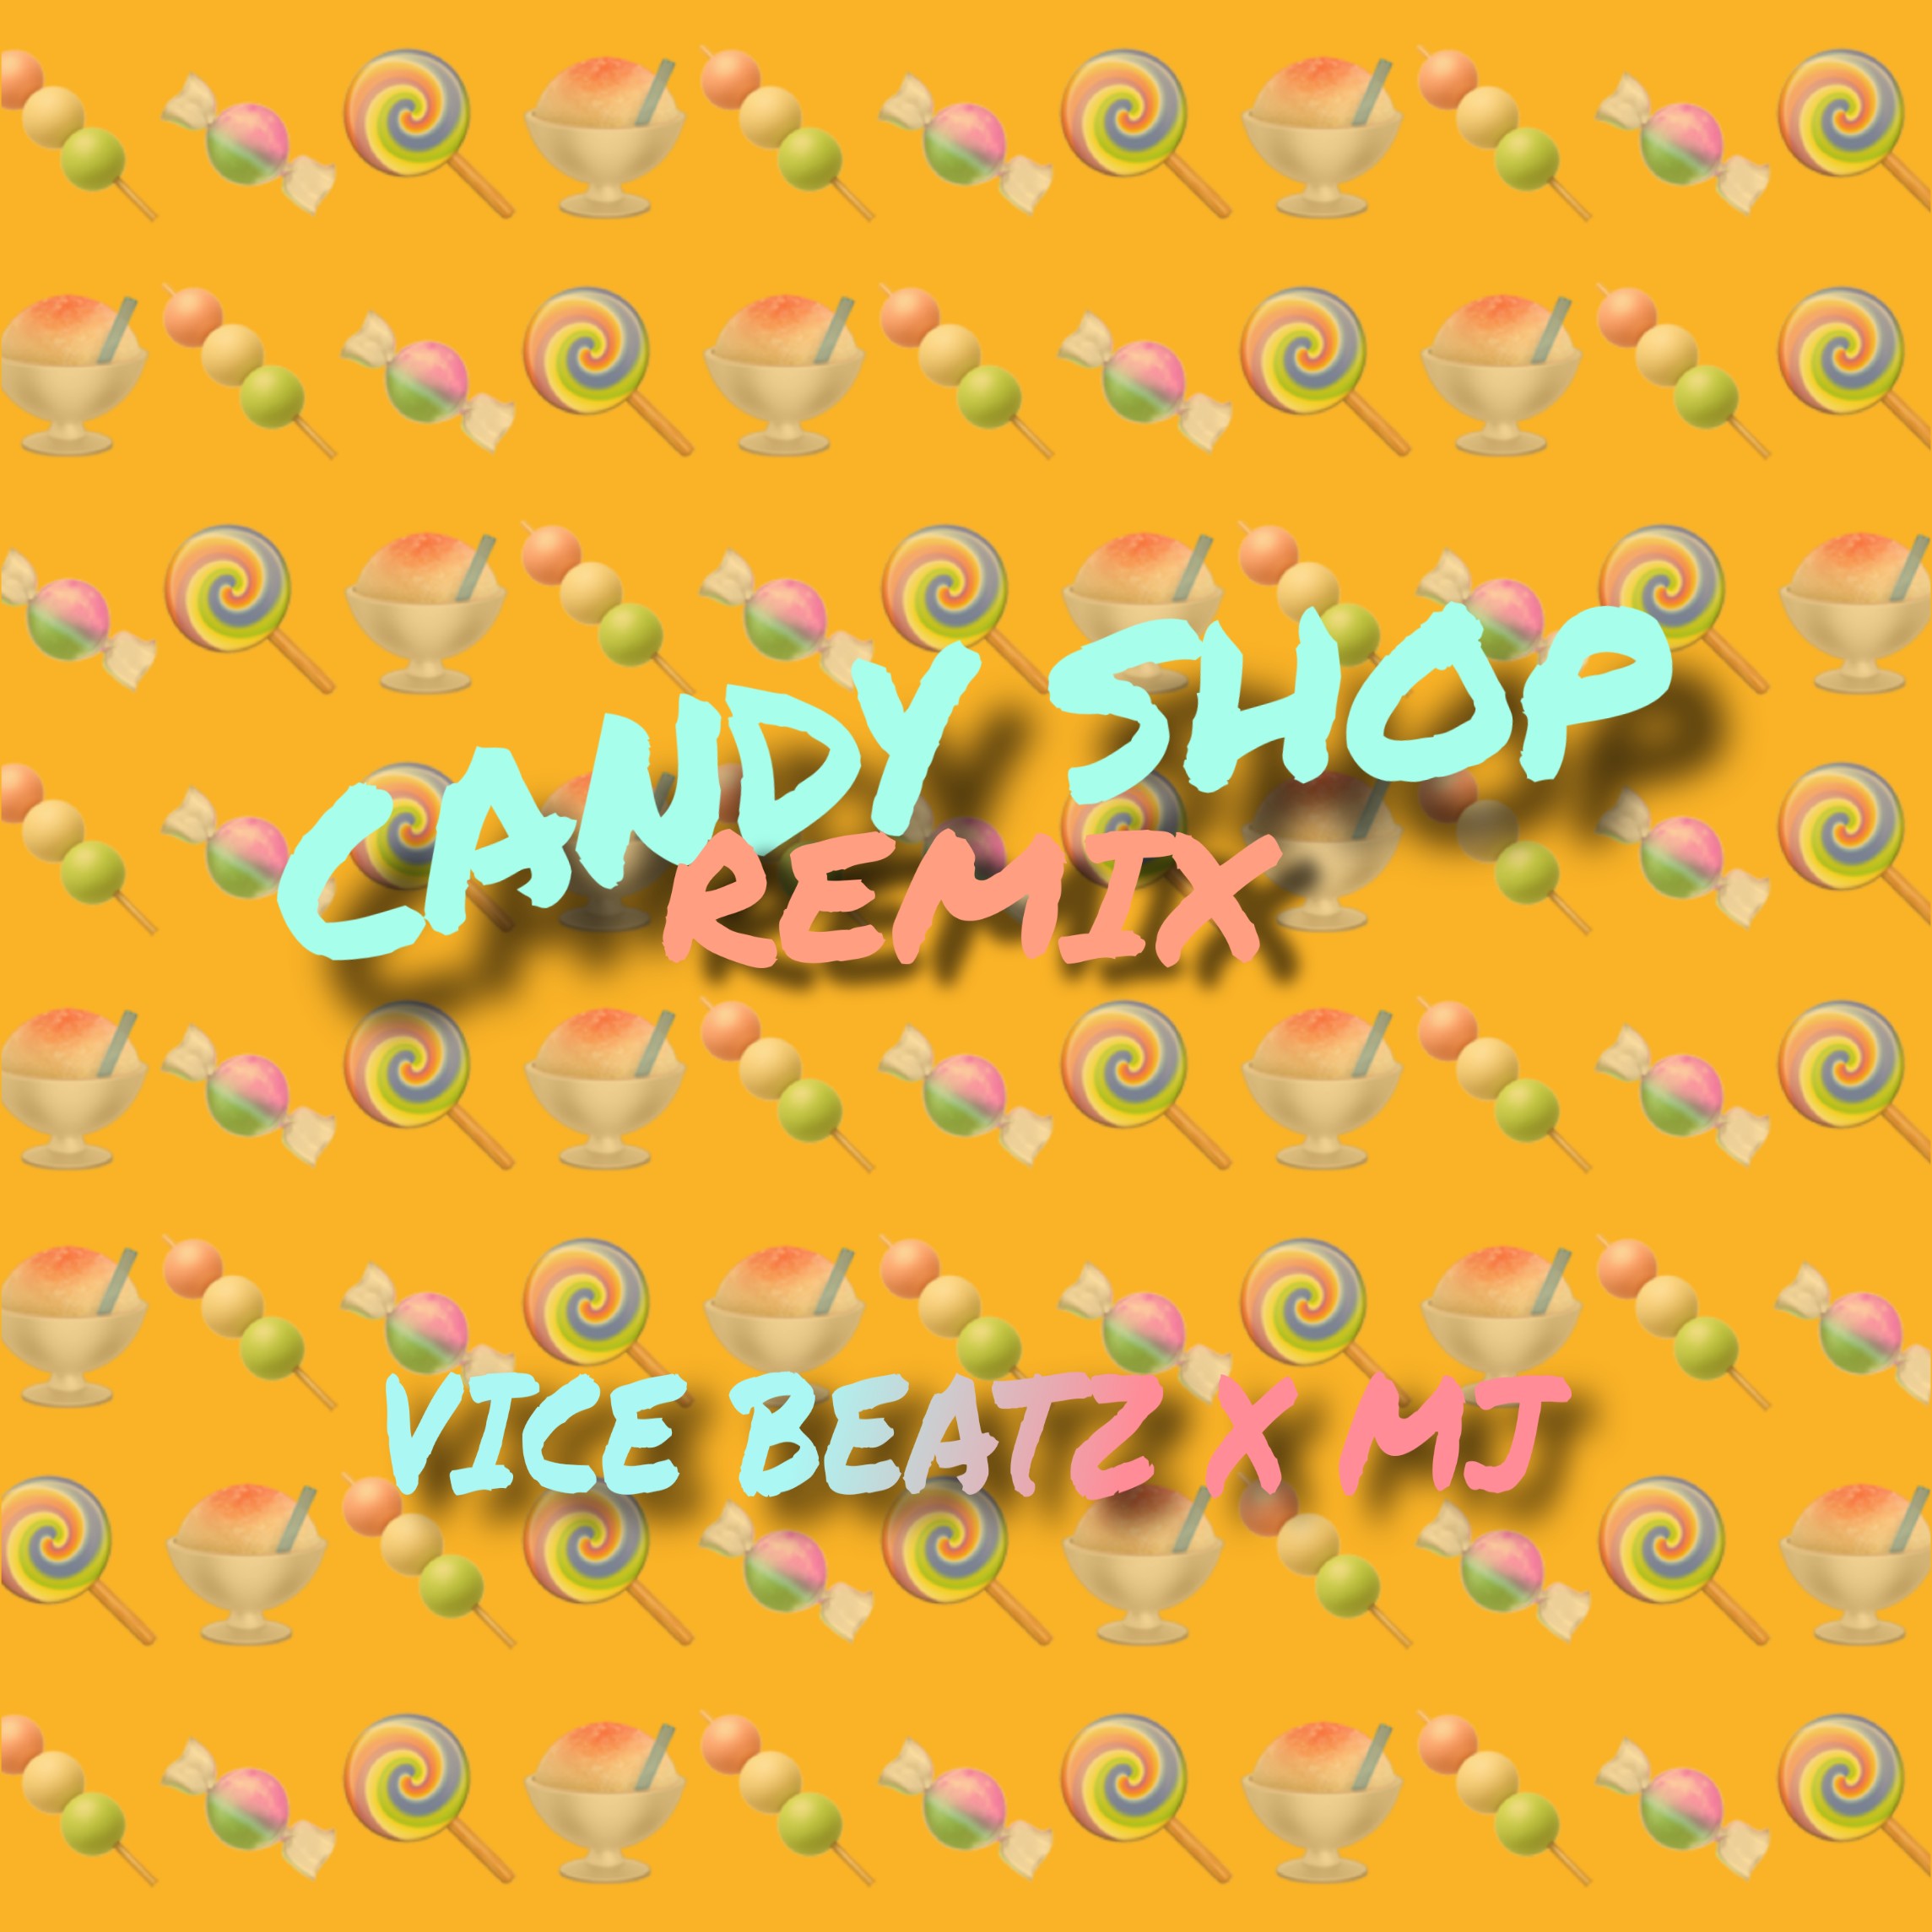 Descargar Candy Shop (Vice_Beatz & MJ Remix)_ CLICK ON 'BUY' For Free Download